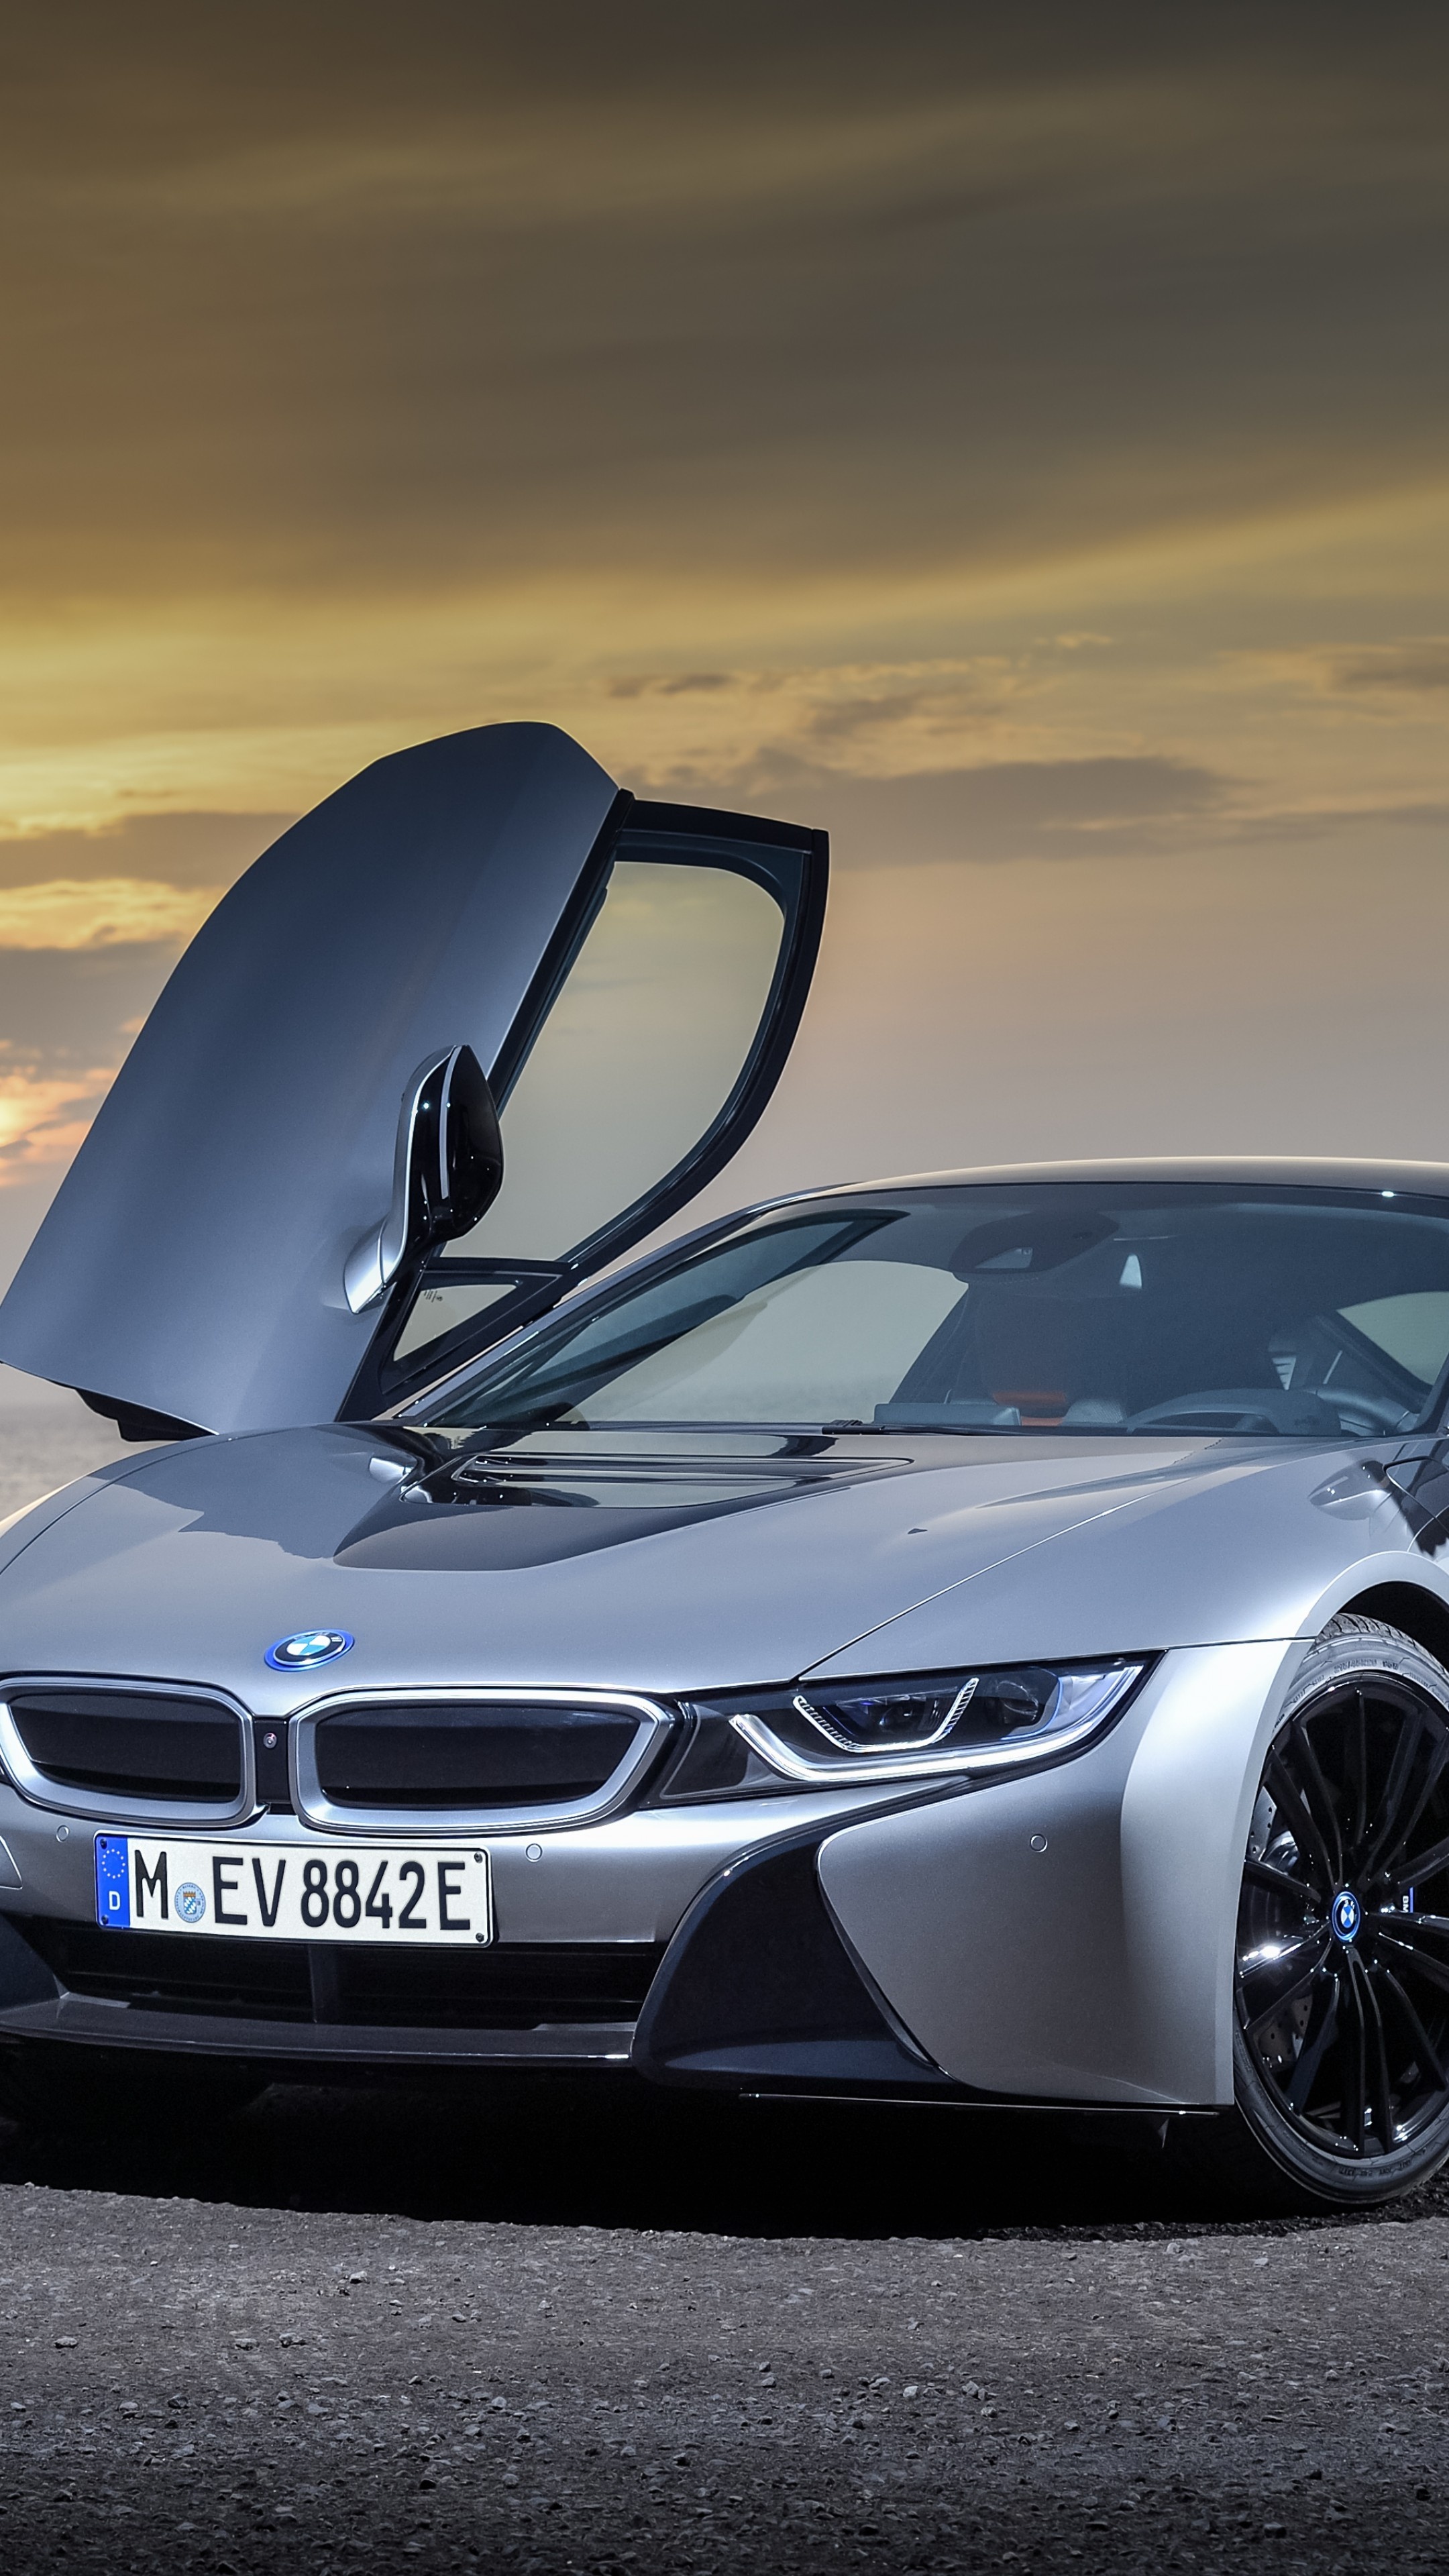 BMW i8 Roadster 2018, 5K cars & bikes wallpaper, Exquisite design, Unmatched power, Luxury in motion, 2160x3840 4K Phone